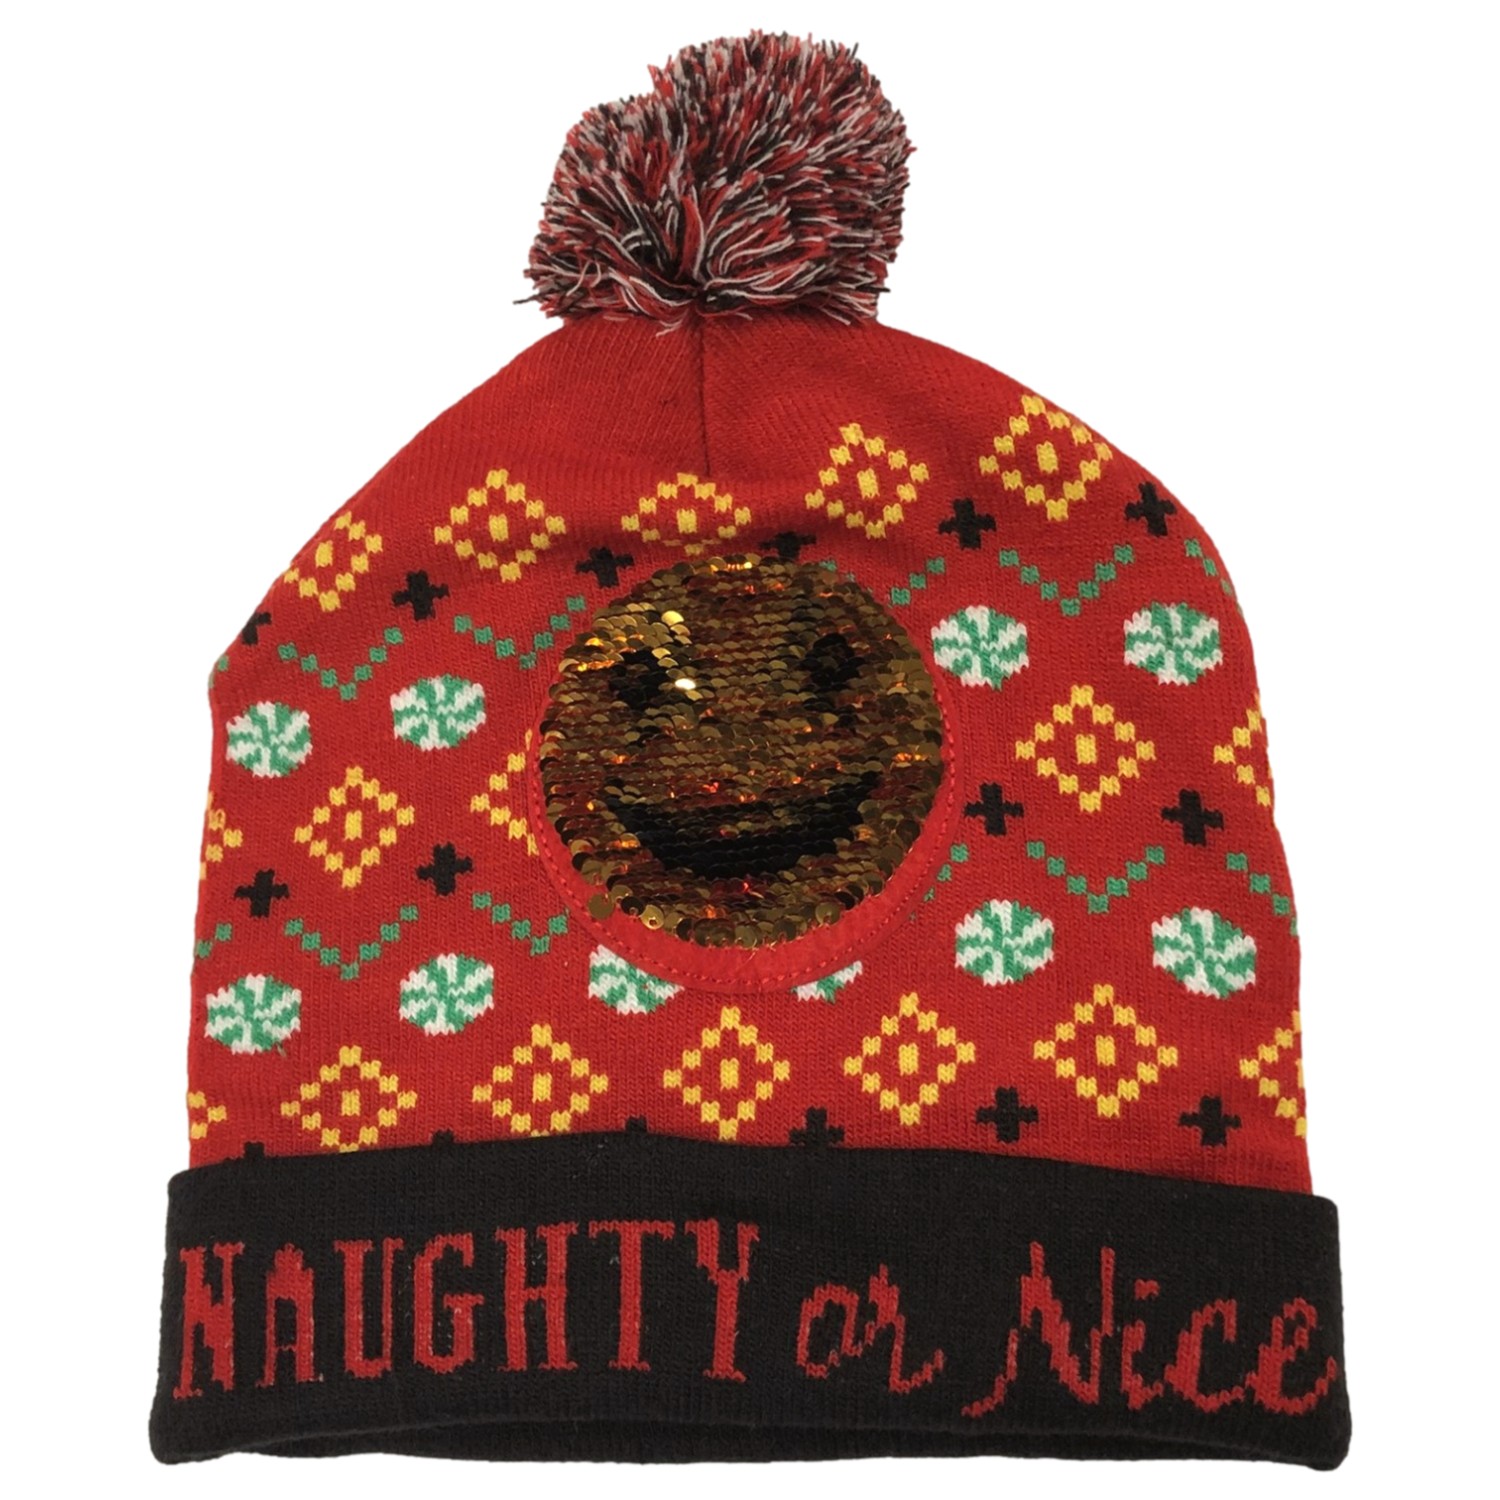 Mens & Womens Red Flip Sequin Naughty Or Nice Christmas Holiday Cap Beanie Hat - image 2 of 2